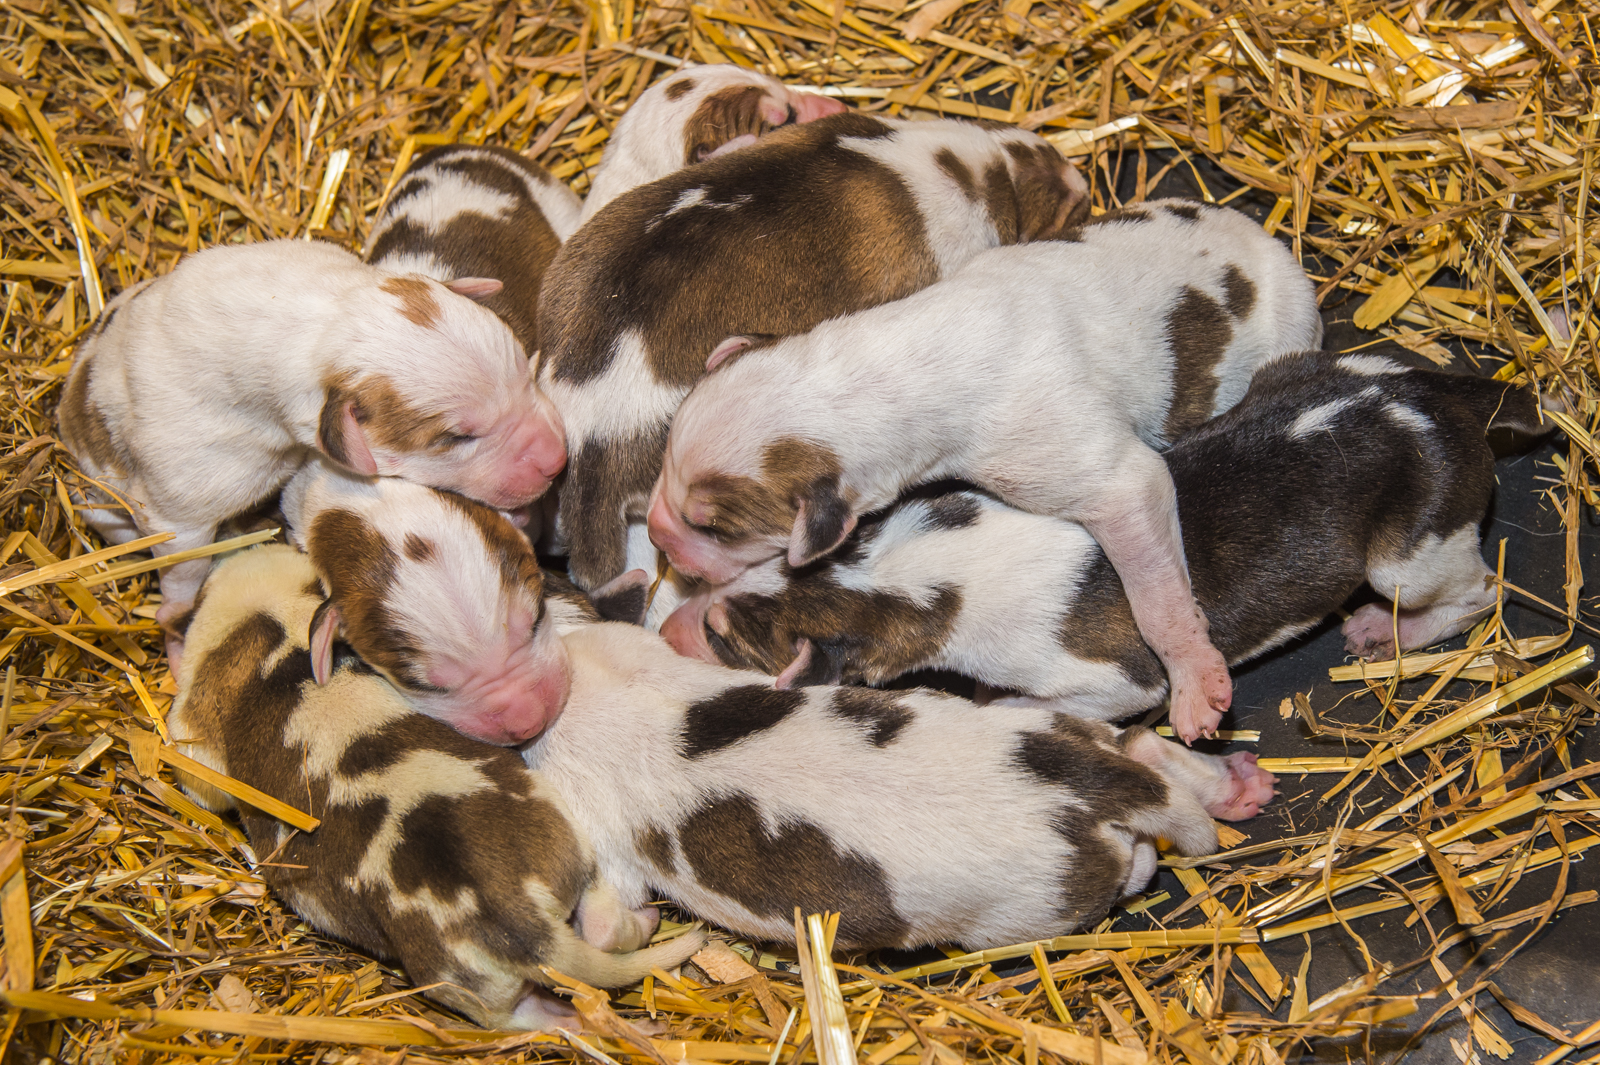 At only 3 days old, a litter of Modern English Hounds